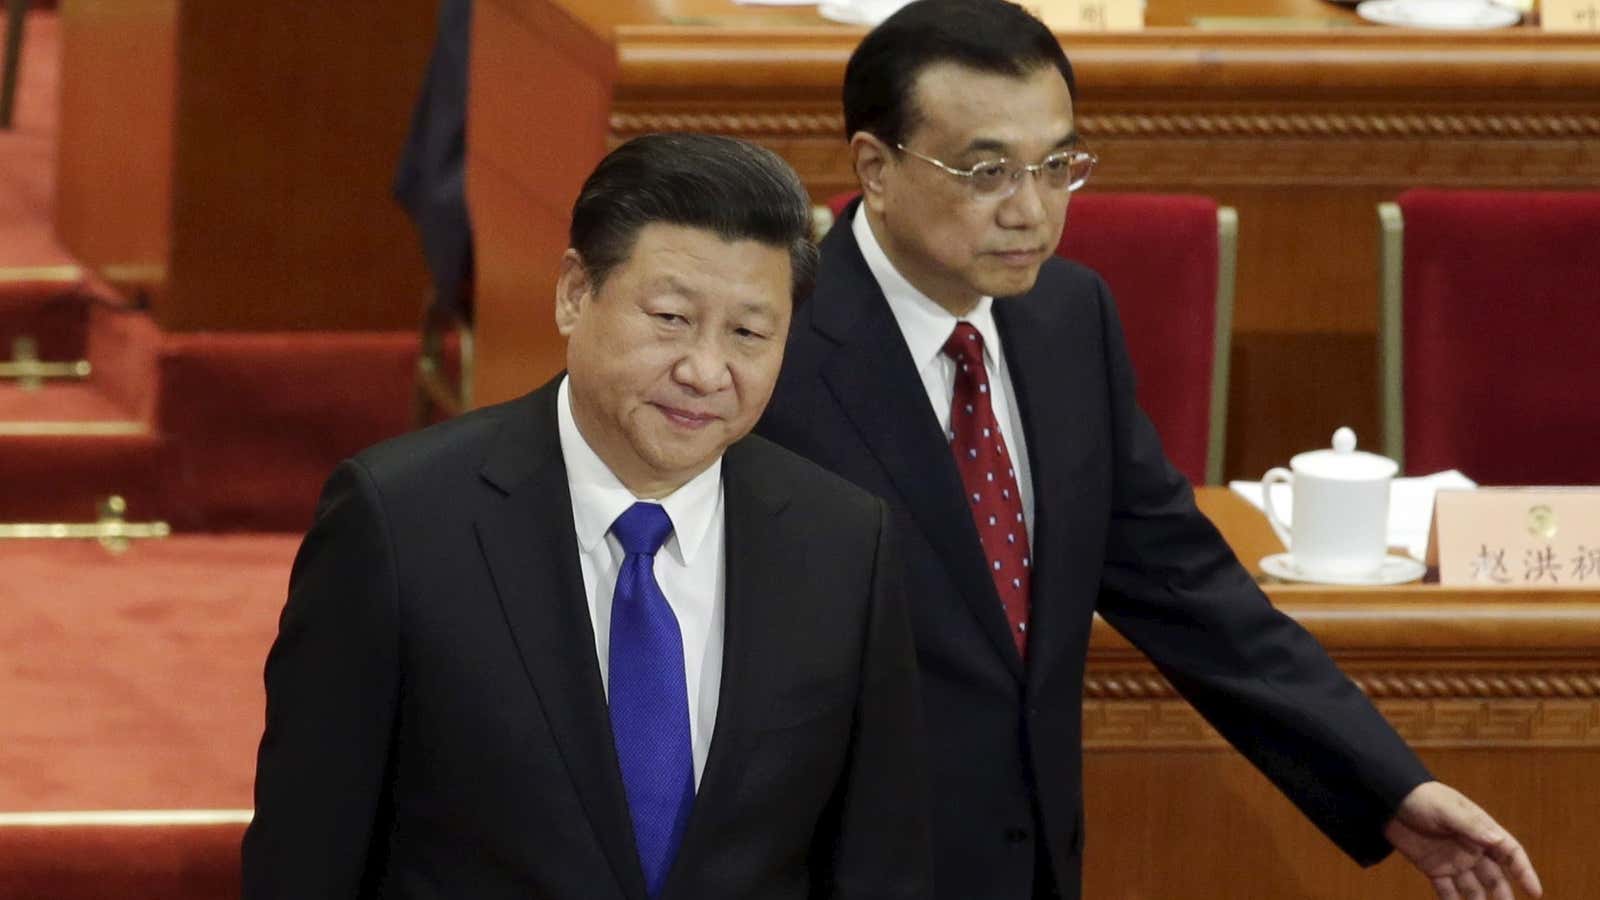 Xi is undermining Premier Li Keqiang’s power, the letter says.